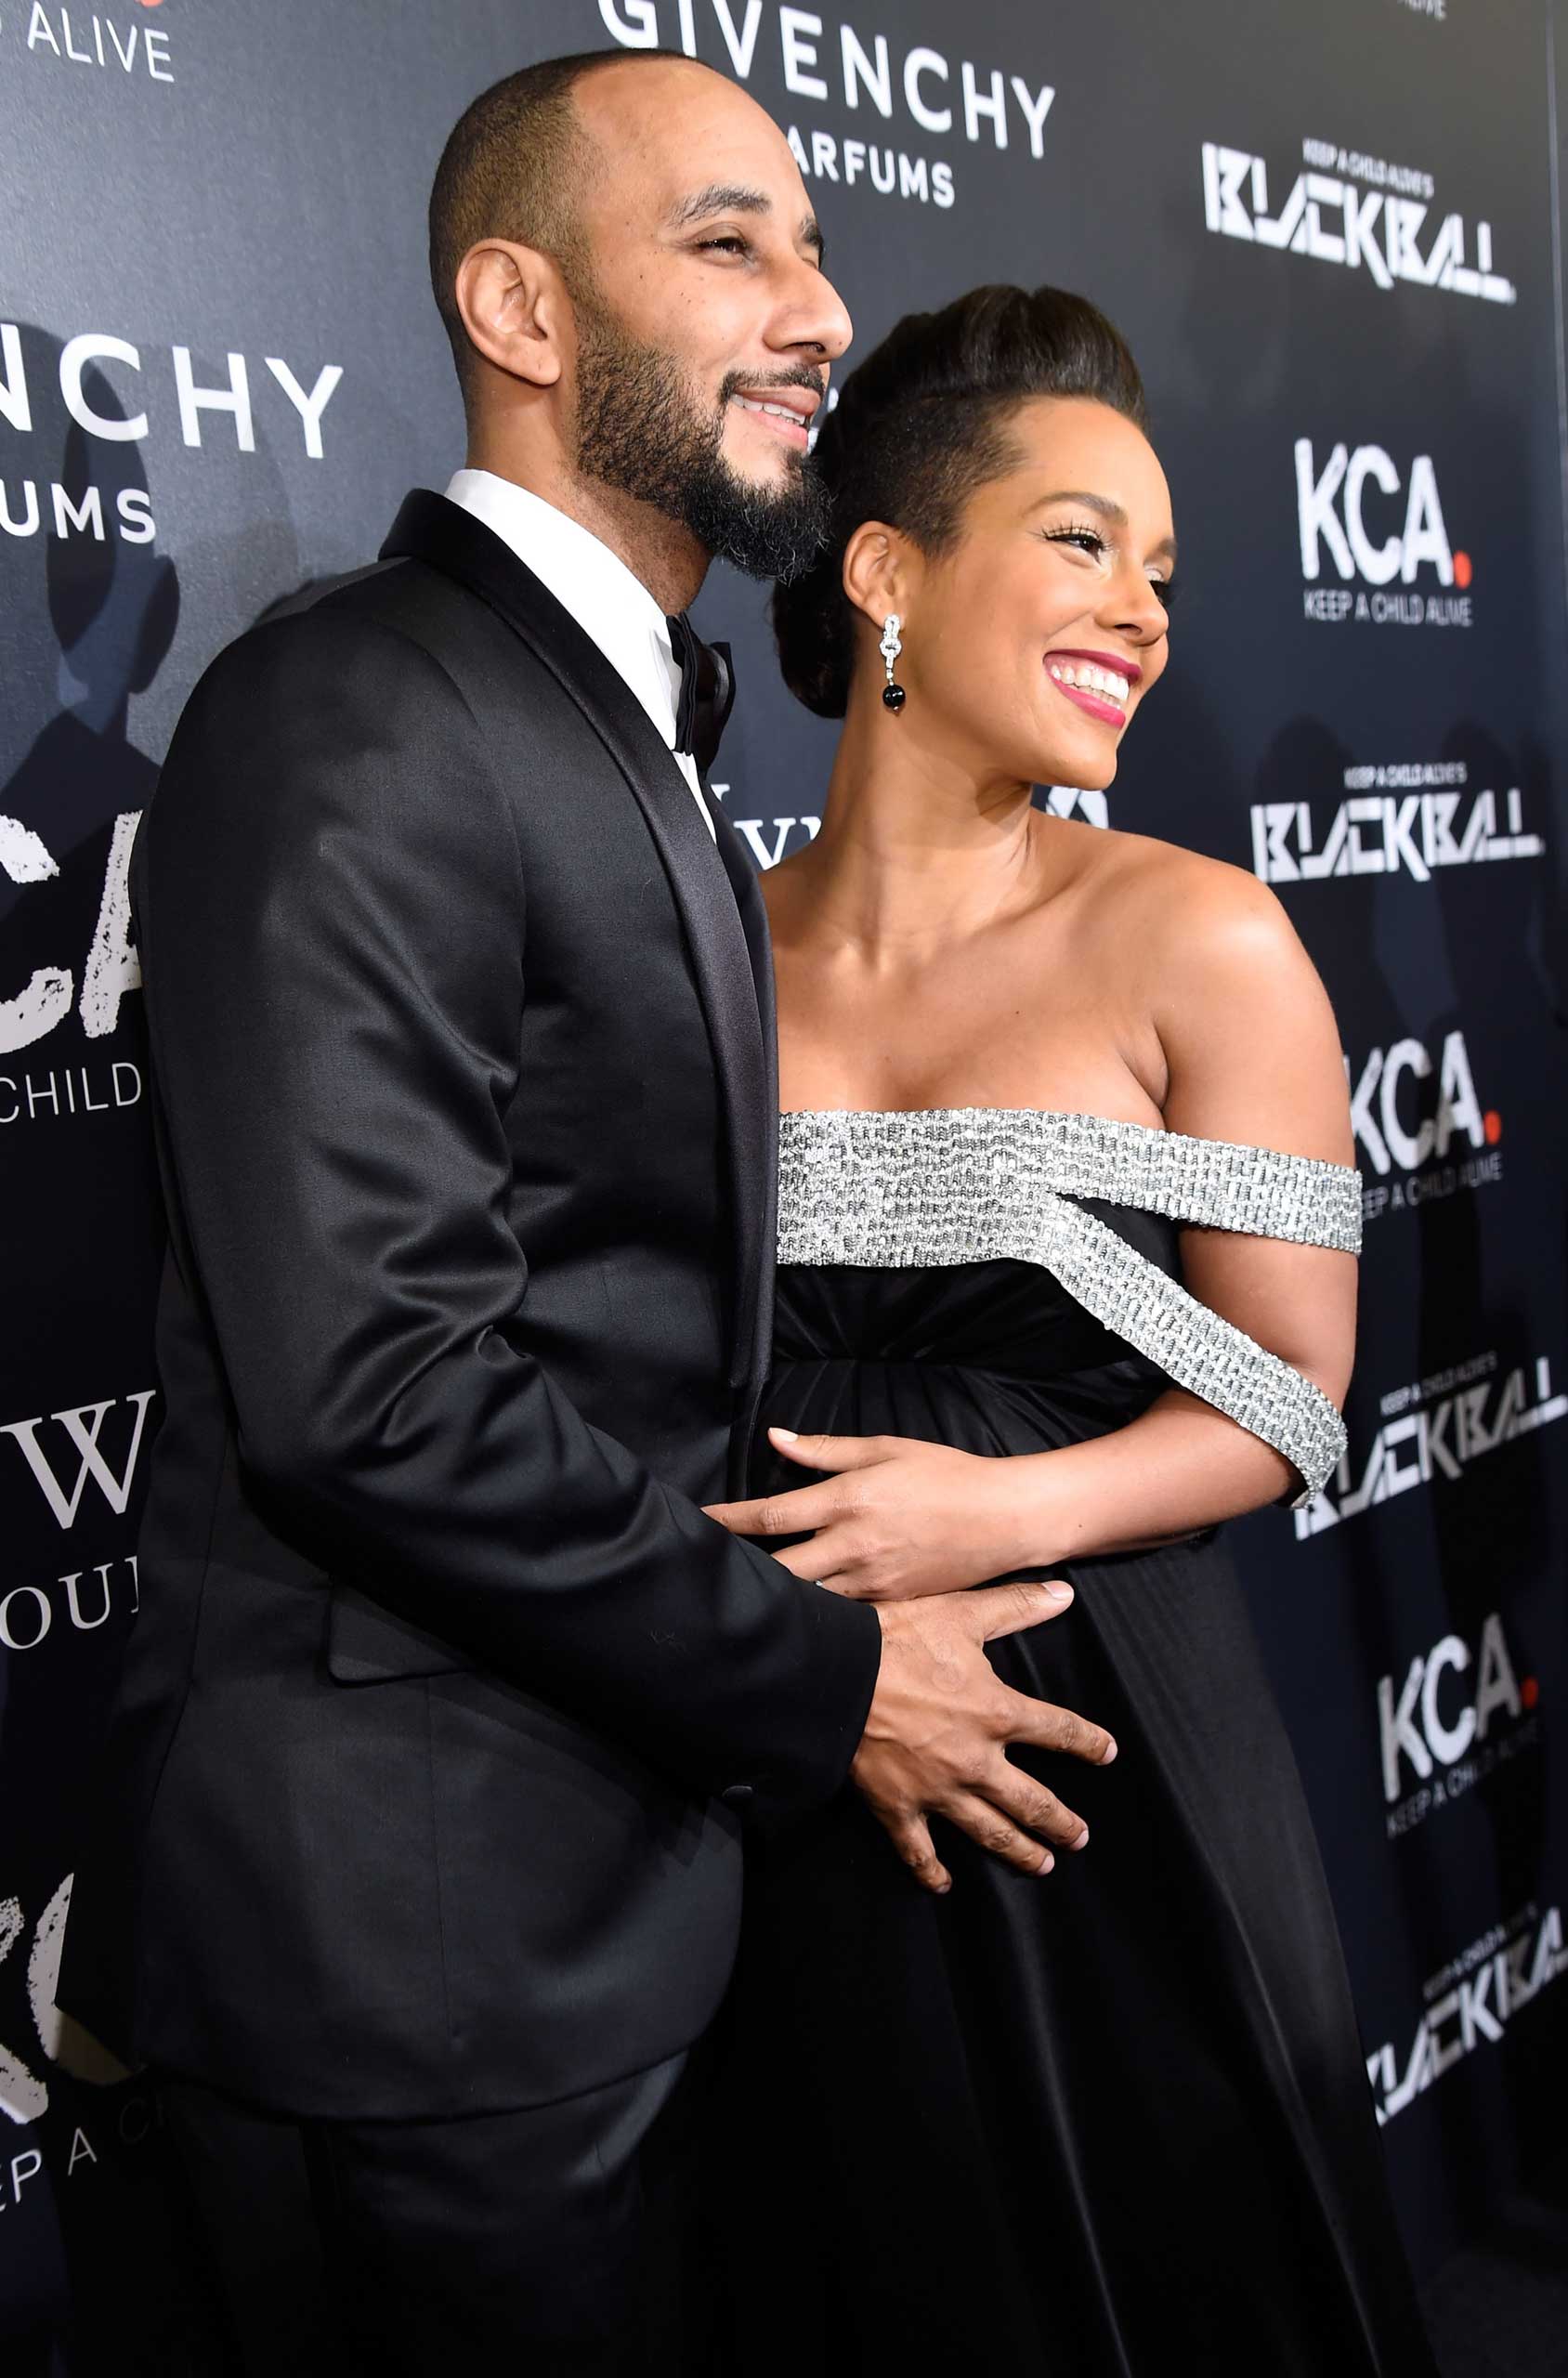 Swizz Beatz and Alicia Keys in New York City, Oct. 30, 2014. The couple welcomed their second child together on Dec. 27., 2014. (Kevin Mazur—WireImage/Getty Images)